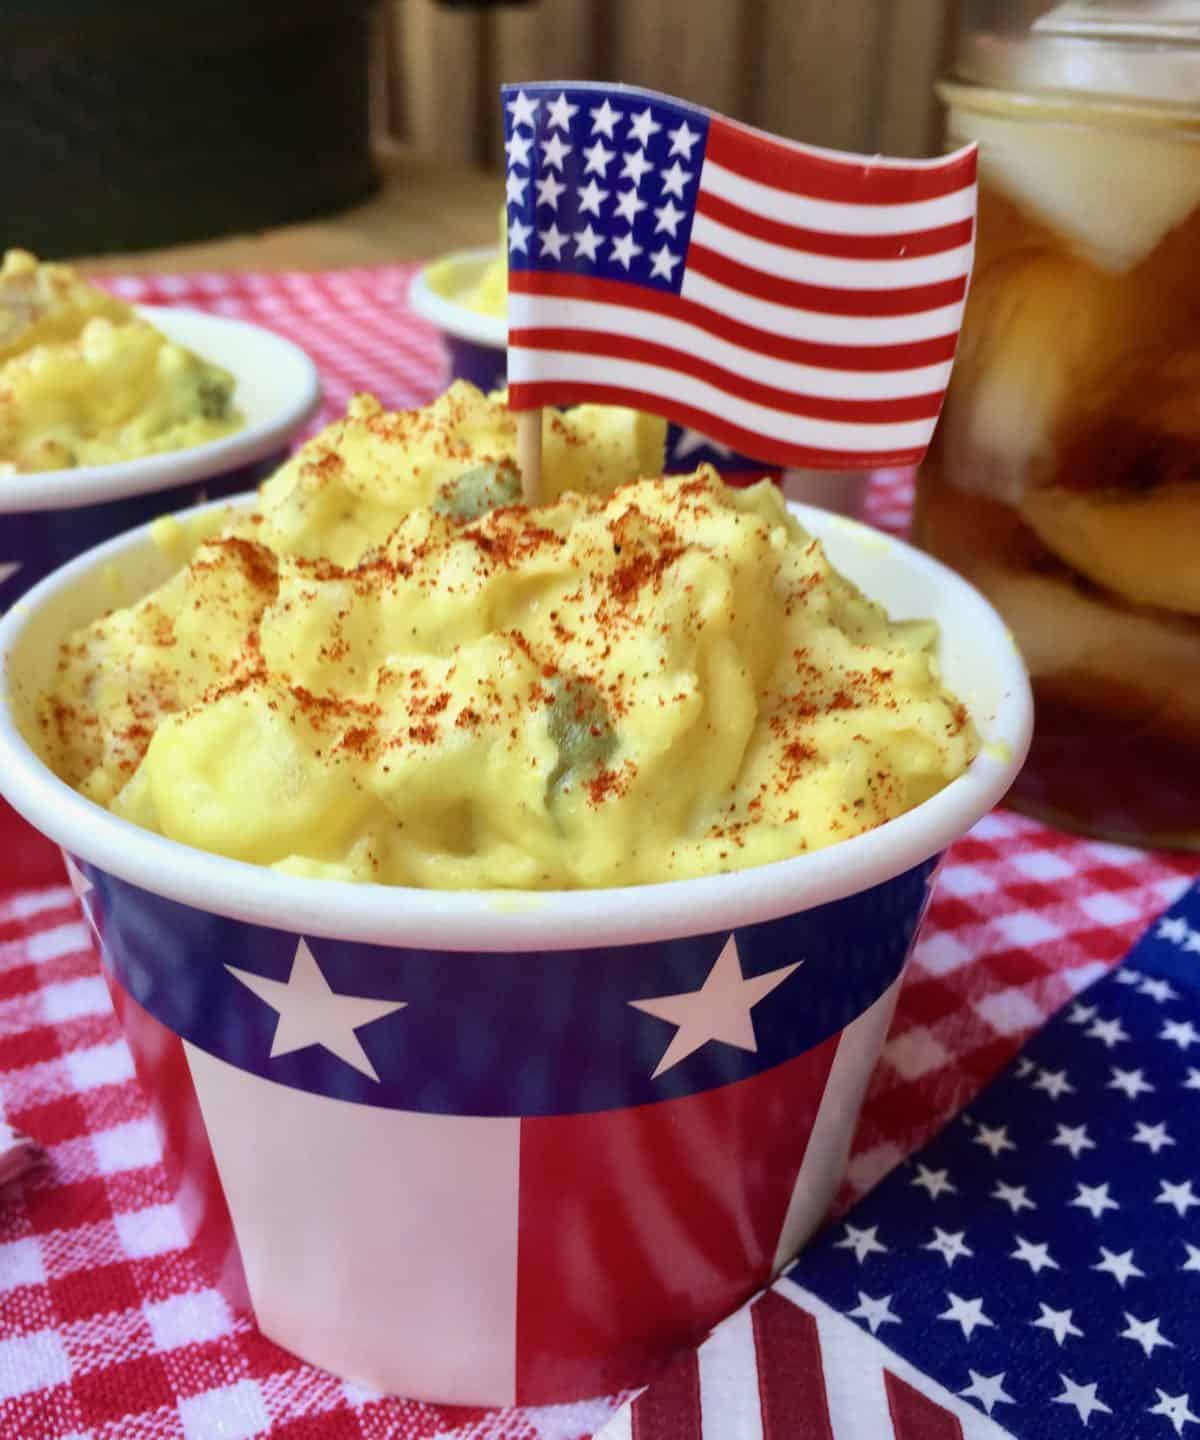 A red, white, and blue bowl full of potato salad.